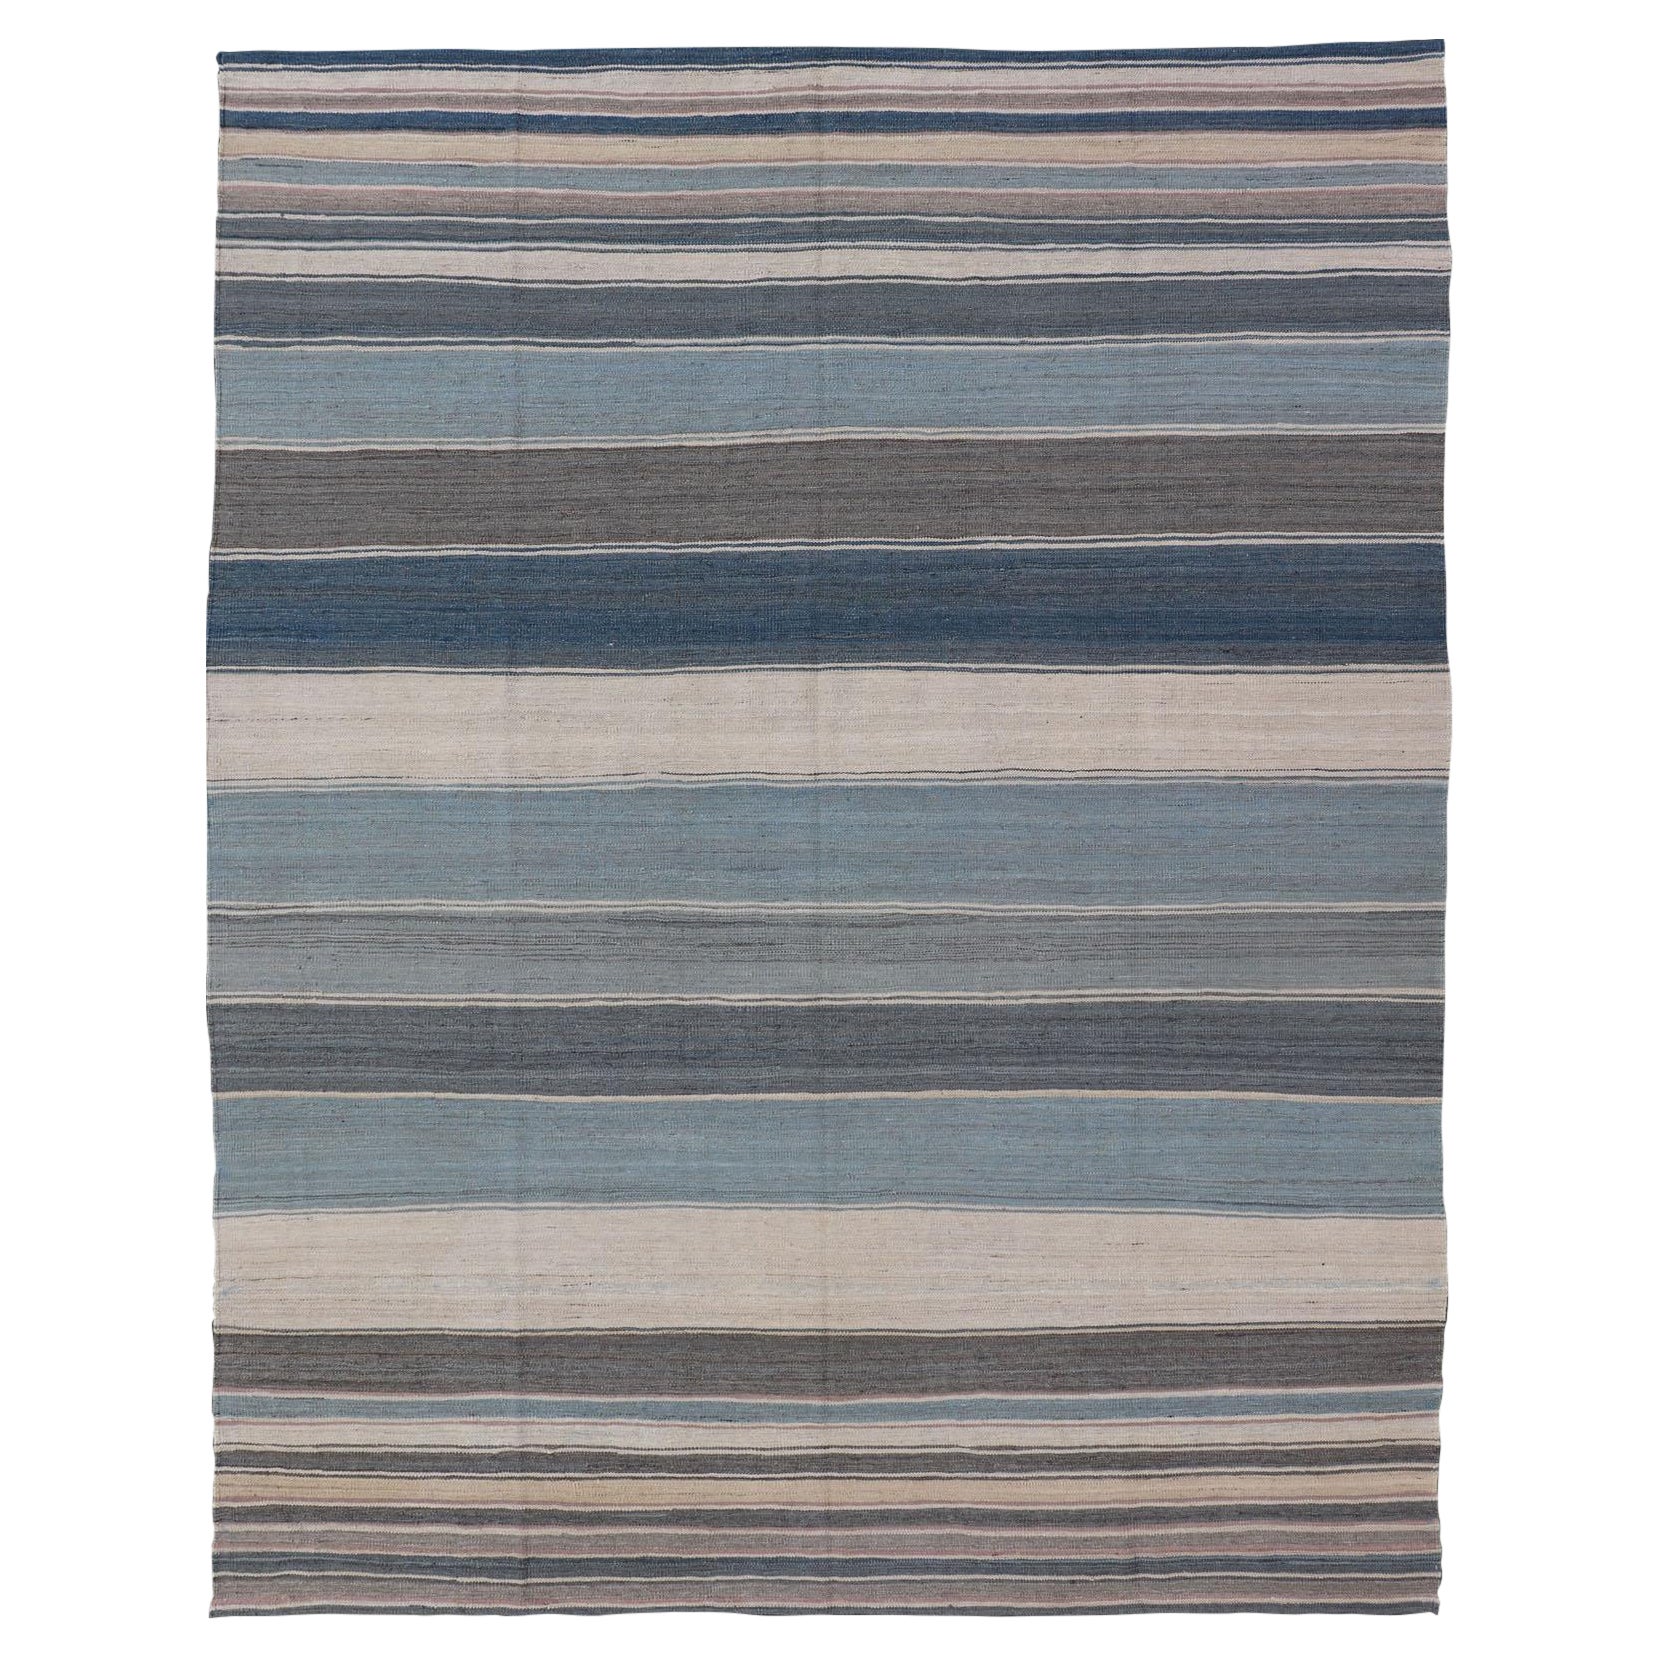 Modern Kilim Rug in Shades of steel Blue, Teal, Brown, Light Gray and Cream